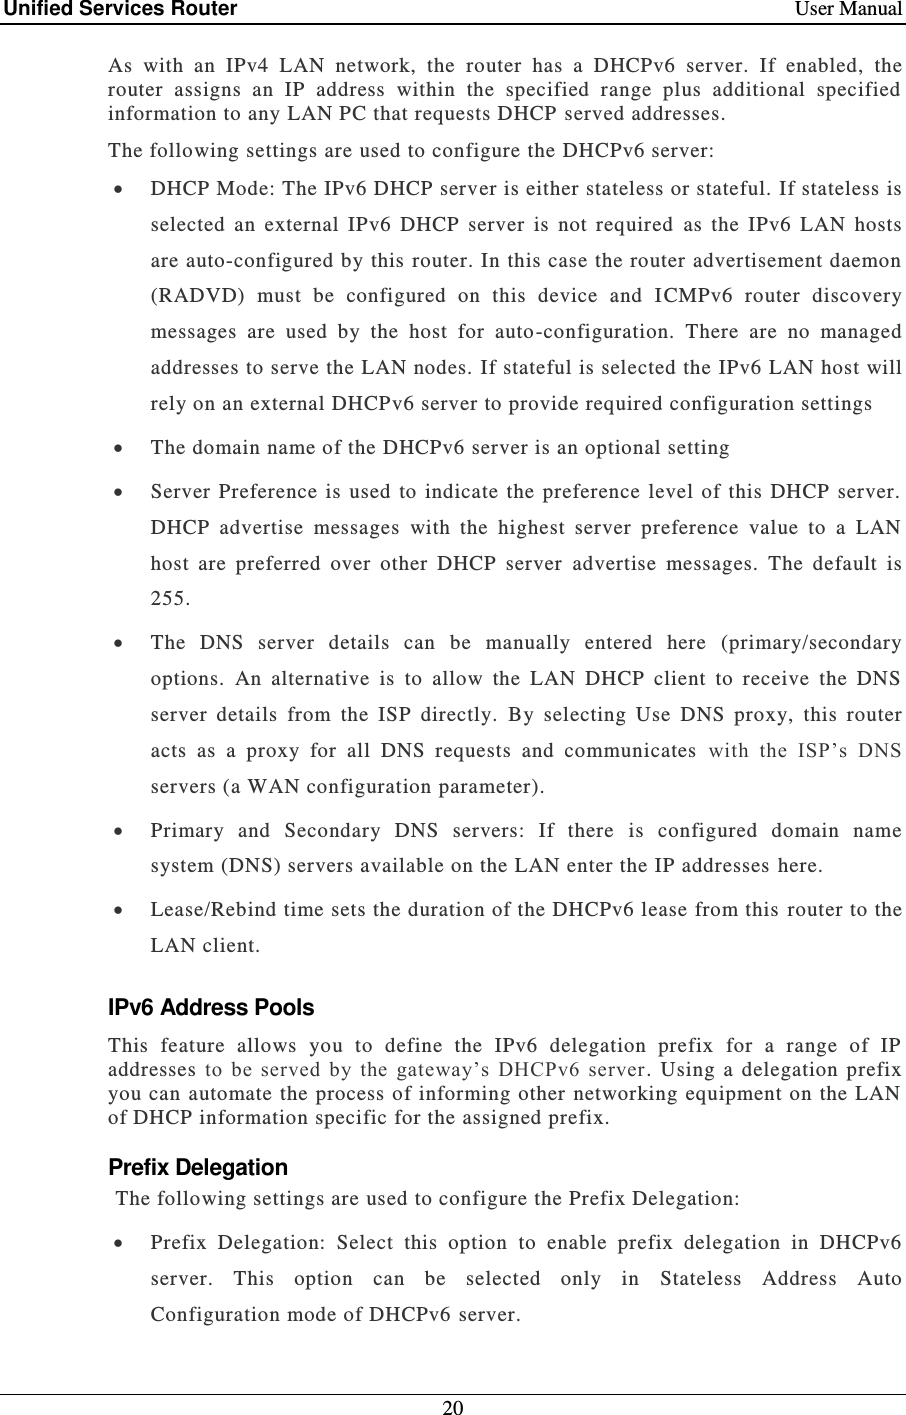 Unified Services Router    User Manual 20  As  with  an  IPv4  LAN  network,  the  router  has  a  DHCPv6  server.  If  enabled,  the router  assigns  an  IP  address  within  the  specified  range  plus  additional  specified information to any LAN PC that requests DHCP  served addresses.  The following settings are used to configure the DHCPv6 server:  DHCP Mode: The IPv6 DHCP server is either stateless or stateful. If stateless is selected  an  external  IPv6  DHCP  server  is  not  required   as  the  IPv6  LAN  hosts are auto-configured by this  router. In this case the router advertisement daemon (RADVD)  must  be  configured  on  this  device  and  I CMPv6  router  discovery messages  are  used  by  the  host  for  auto-configuration.  There  are  no  managed addresses to serve the LAN nodes. If stateful is selected the IPv6 LAN host will rely on an external DHCPv6 server to provide required configuration settings   The domain name of the DHCPv6 server is an optional setting   Server  Preference  is  used  to  indicate  the  preference  level  of  this  DHCP  server.  DHCP  advertise  messages  with  the  highest  server  preference  value  to  a  LAN host  are  preferred  over  other  DHCP  server  advertise  messages.  The  default  is 255.  The  DNS  server  details  can  be  manually  entered  here  (primary/secondary options.  An  alternative  is  to  allow  the  LAN  DHCP  client  to  receive  the  DNS server  details  from  the  ISP  directly.  By  selecting  Use  DNS  proxy,  this  router acts  as  a  proxy  for  all  DNS  requests  and  communicates   with  the  ISP’s  DNS servers (a WAN configuration parameter).  Primary  and  Secondary  DNS  servers:  If  there  is  configured  domain  name system (DNS) servers available on the LAN enter the IP addresses here.   Lease/Rebind time sets the duration of the DHCPv6 lease from this  router to the LAN client. IPv6 Address Pools This  feature  allows  you  to  define  the  IPv6  delegation  prefix  for  a  range  of  IP addresses  to  be  served  by  the  gateway’s  DHCPv6  server .  Using  a  delegation  prefix you can automate the process of informing other networking equipment on the LAN of DHCP information specific for the assigned prefix.  Prefix Delegation The following settings are used to configure the Prefix Delegation:   Prefix  Delegation:  Select  this  option  to  enable  prefix  delegation  in  DHCPv6 server.  This  option  can  be  selected  only  in  Stateless  Address  Auto Configuration mode of DHCPv6 server. 